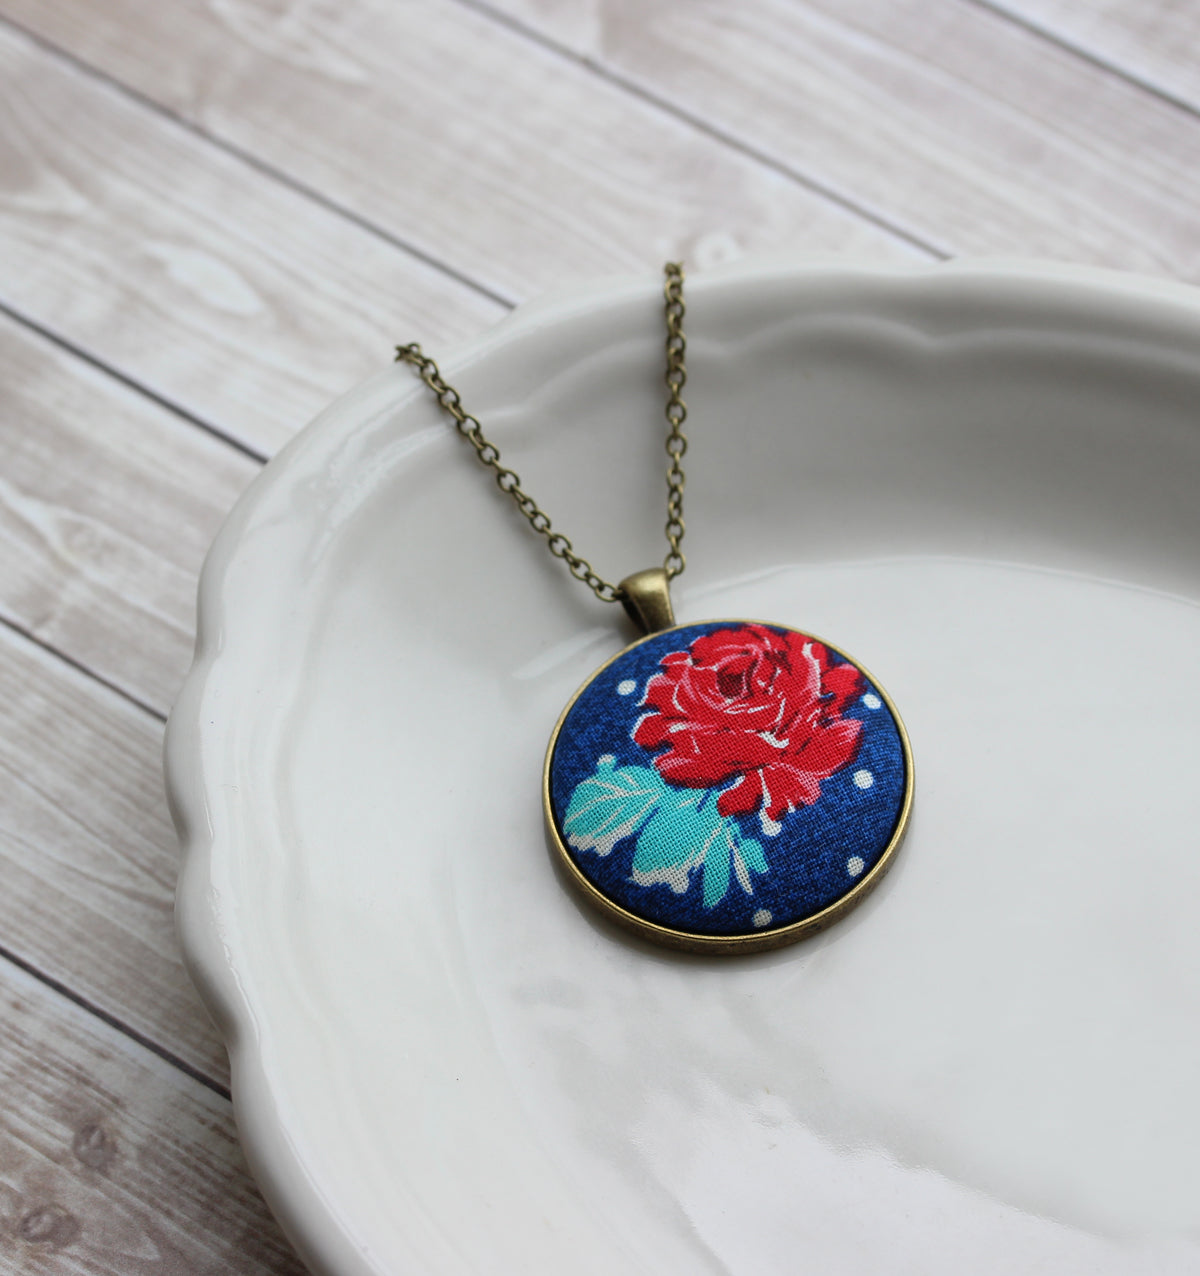 Red Rose Pendant Necklace, Cute Floral Fabric Jewelry